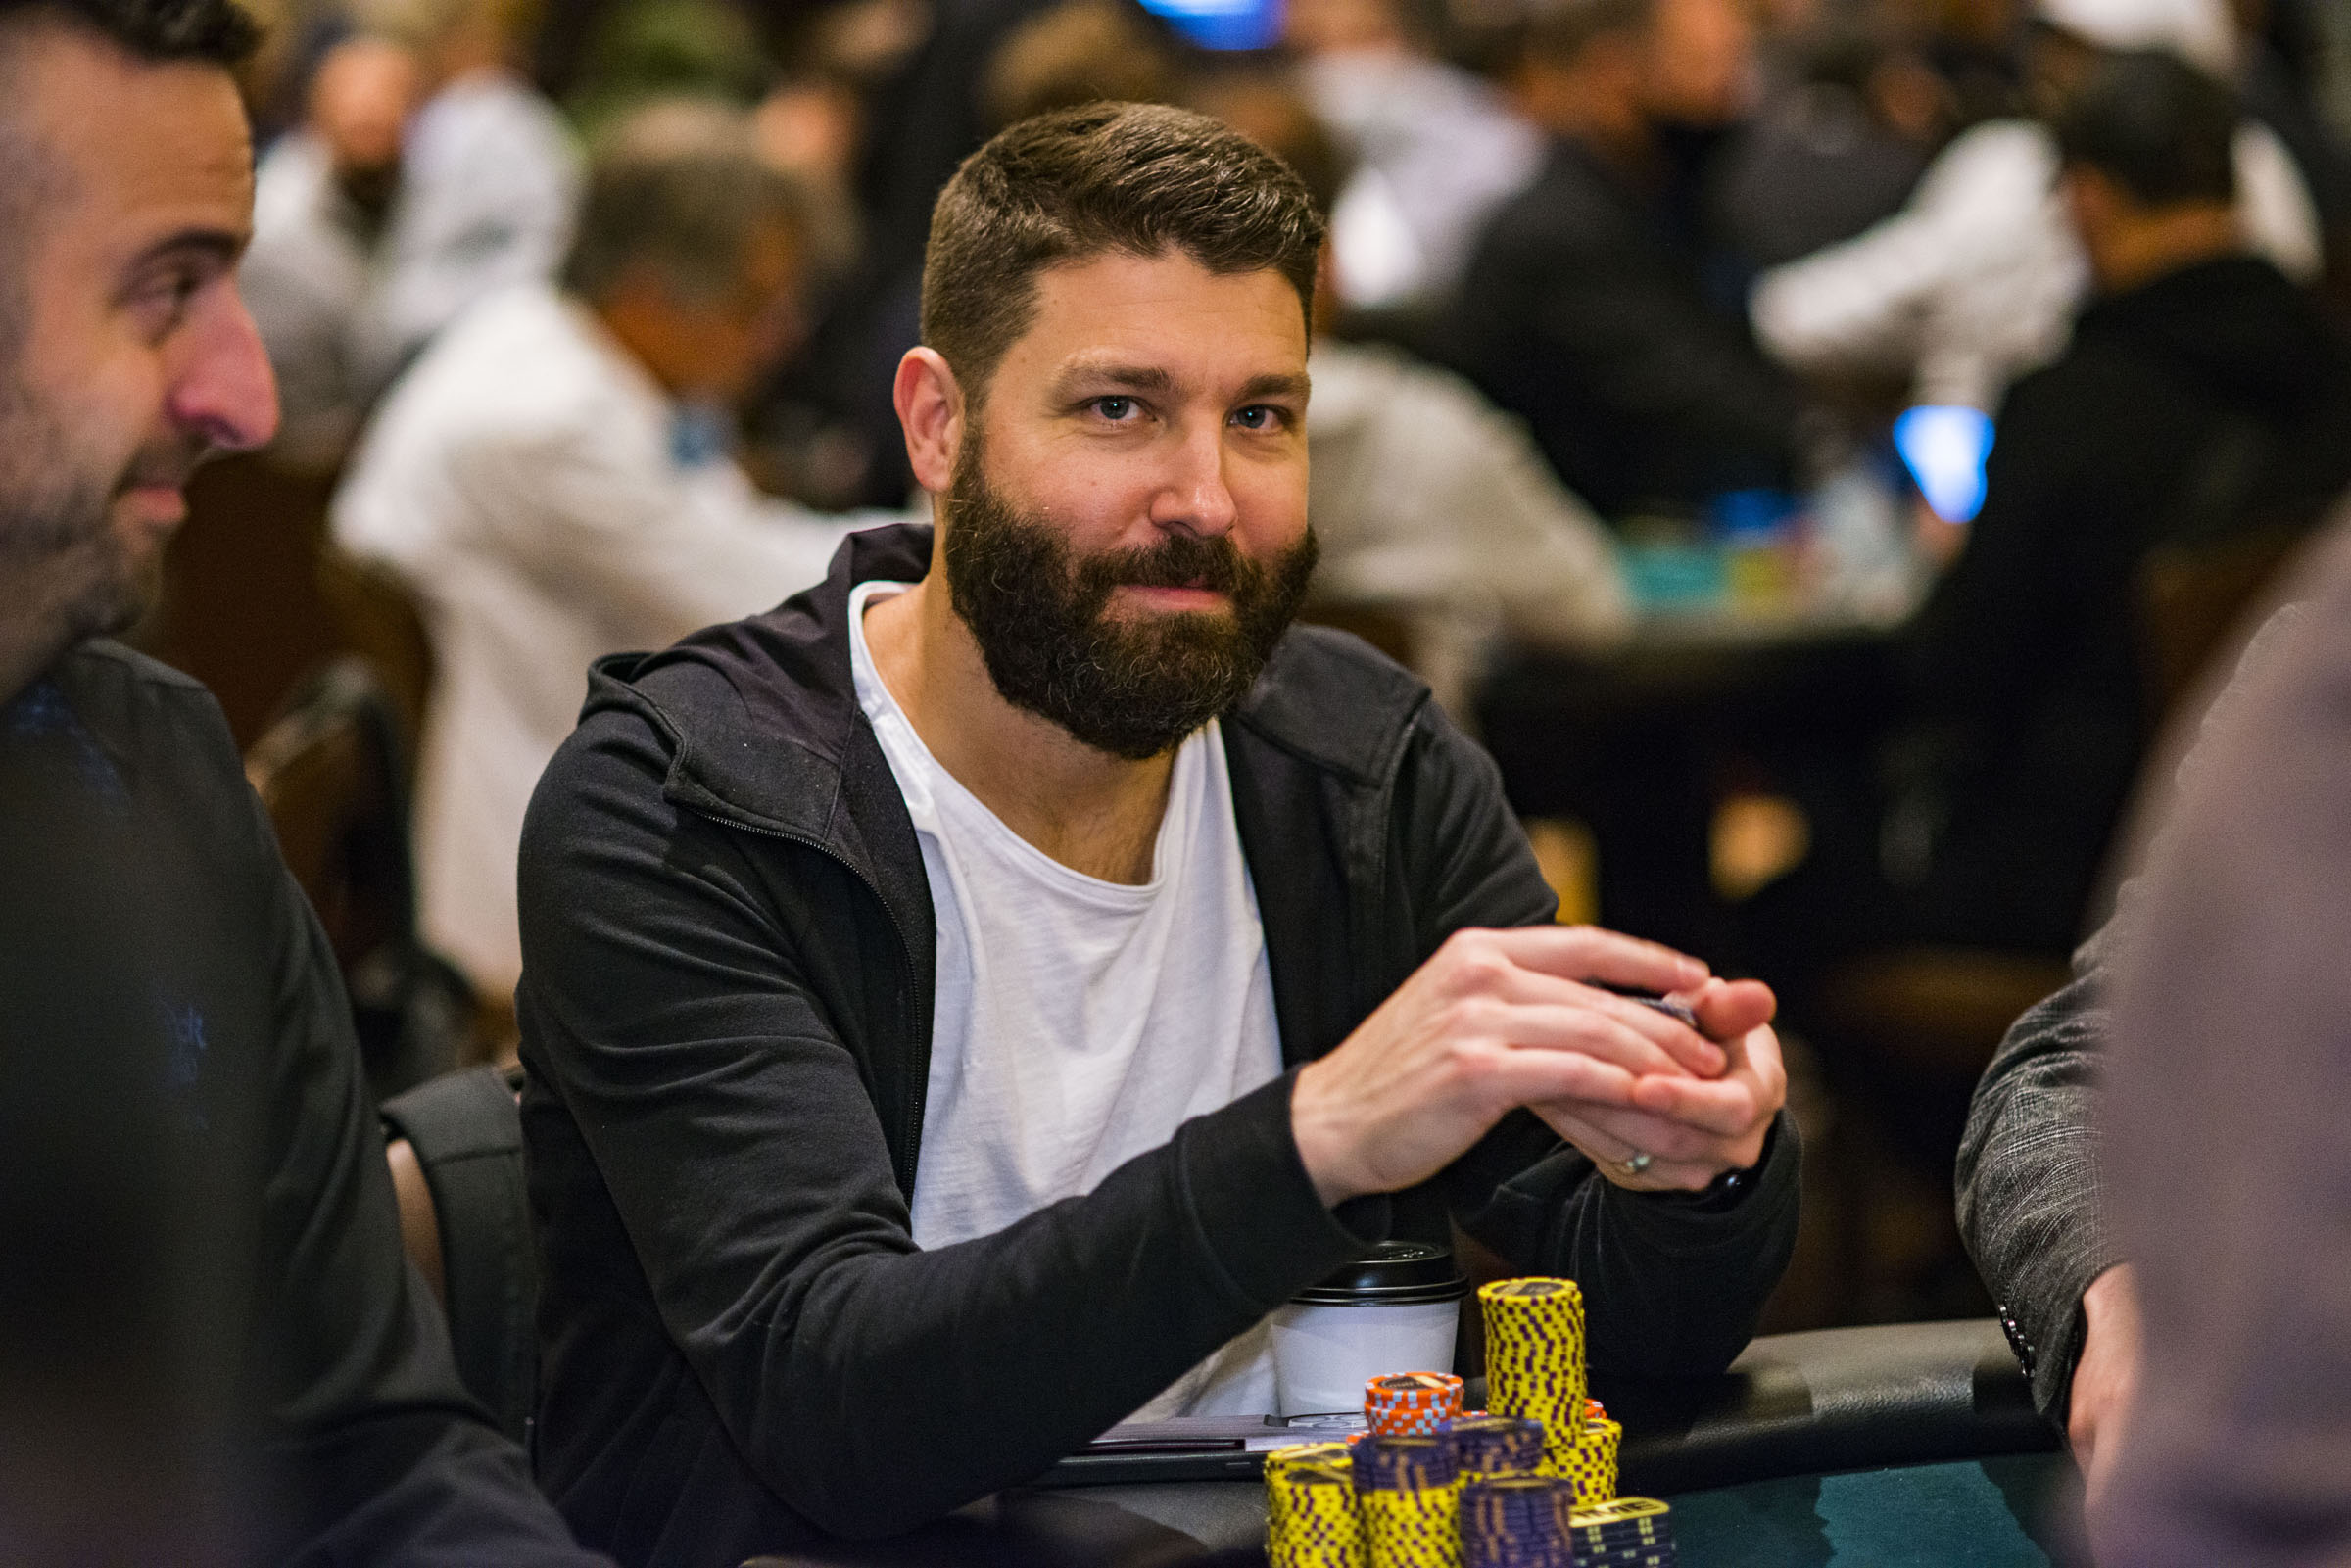 Jeremy Ausmus Among Chip Leaders After WPT Lucky Hearts Poker Open Day 2